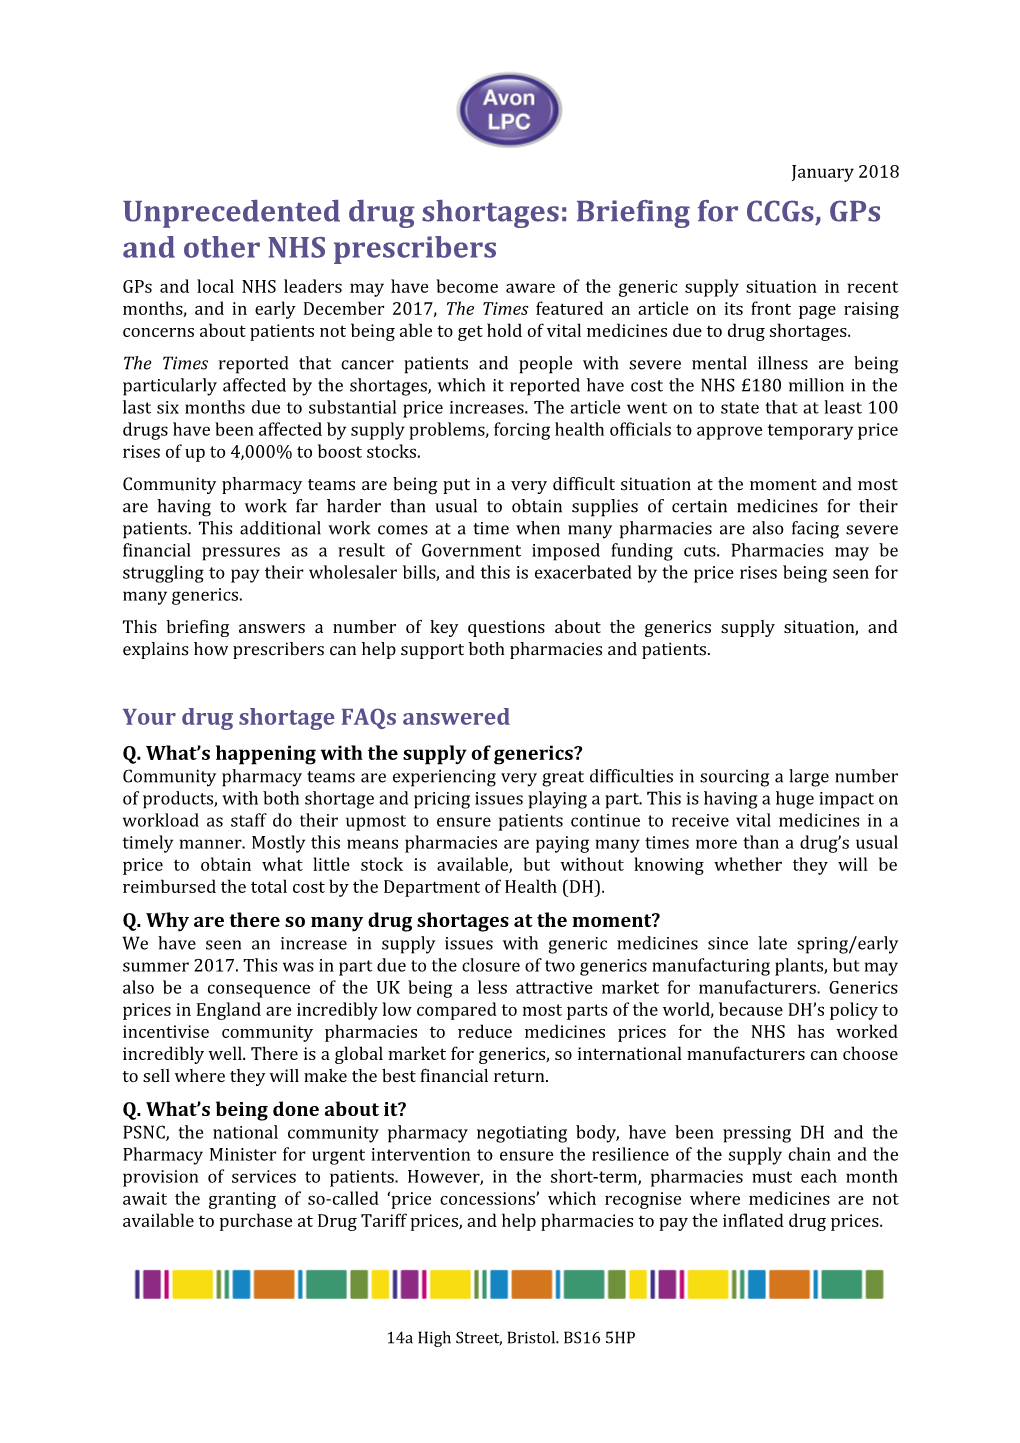 Unprecedented Drug Shortages: Briefing for Ccgs, Gps and Other NHS Prescribers